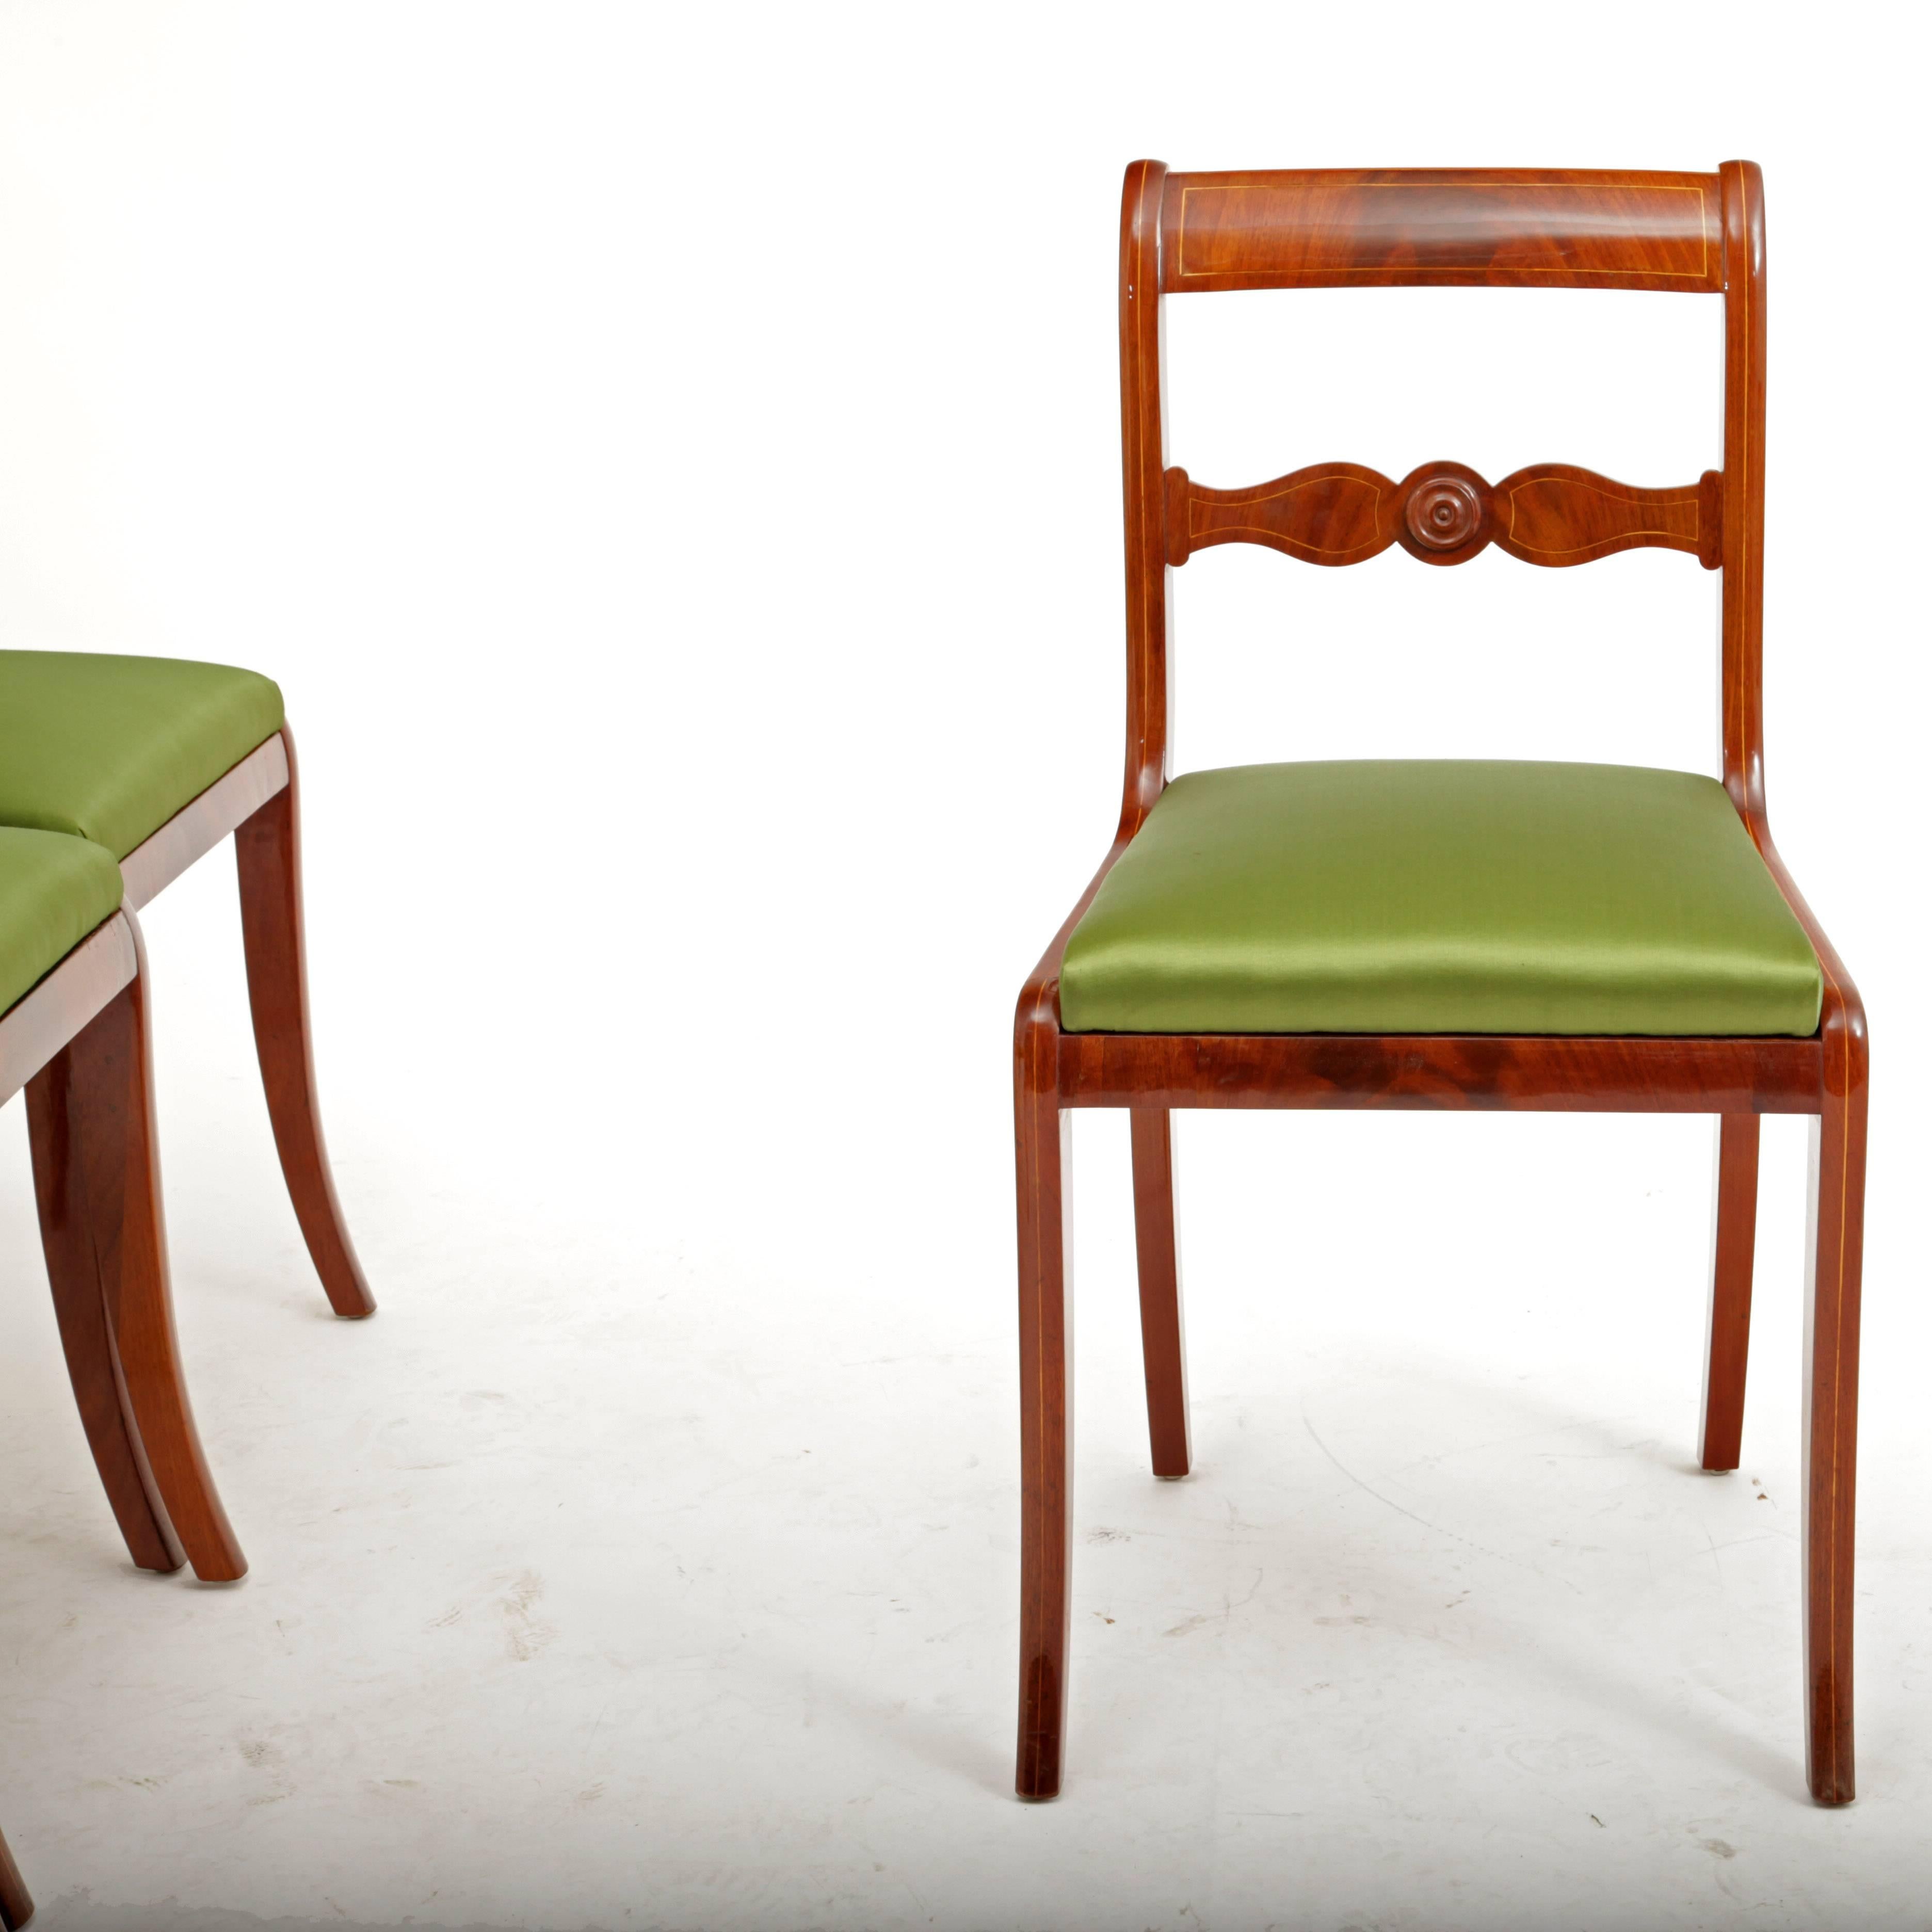 Wood Dining Chairs, Central, Germany, circa 1830